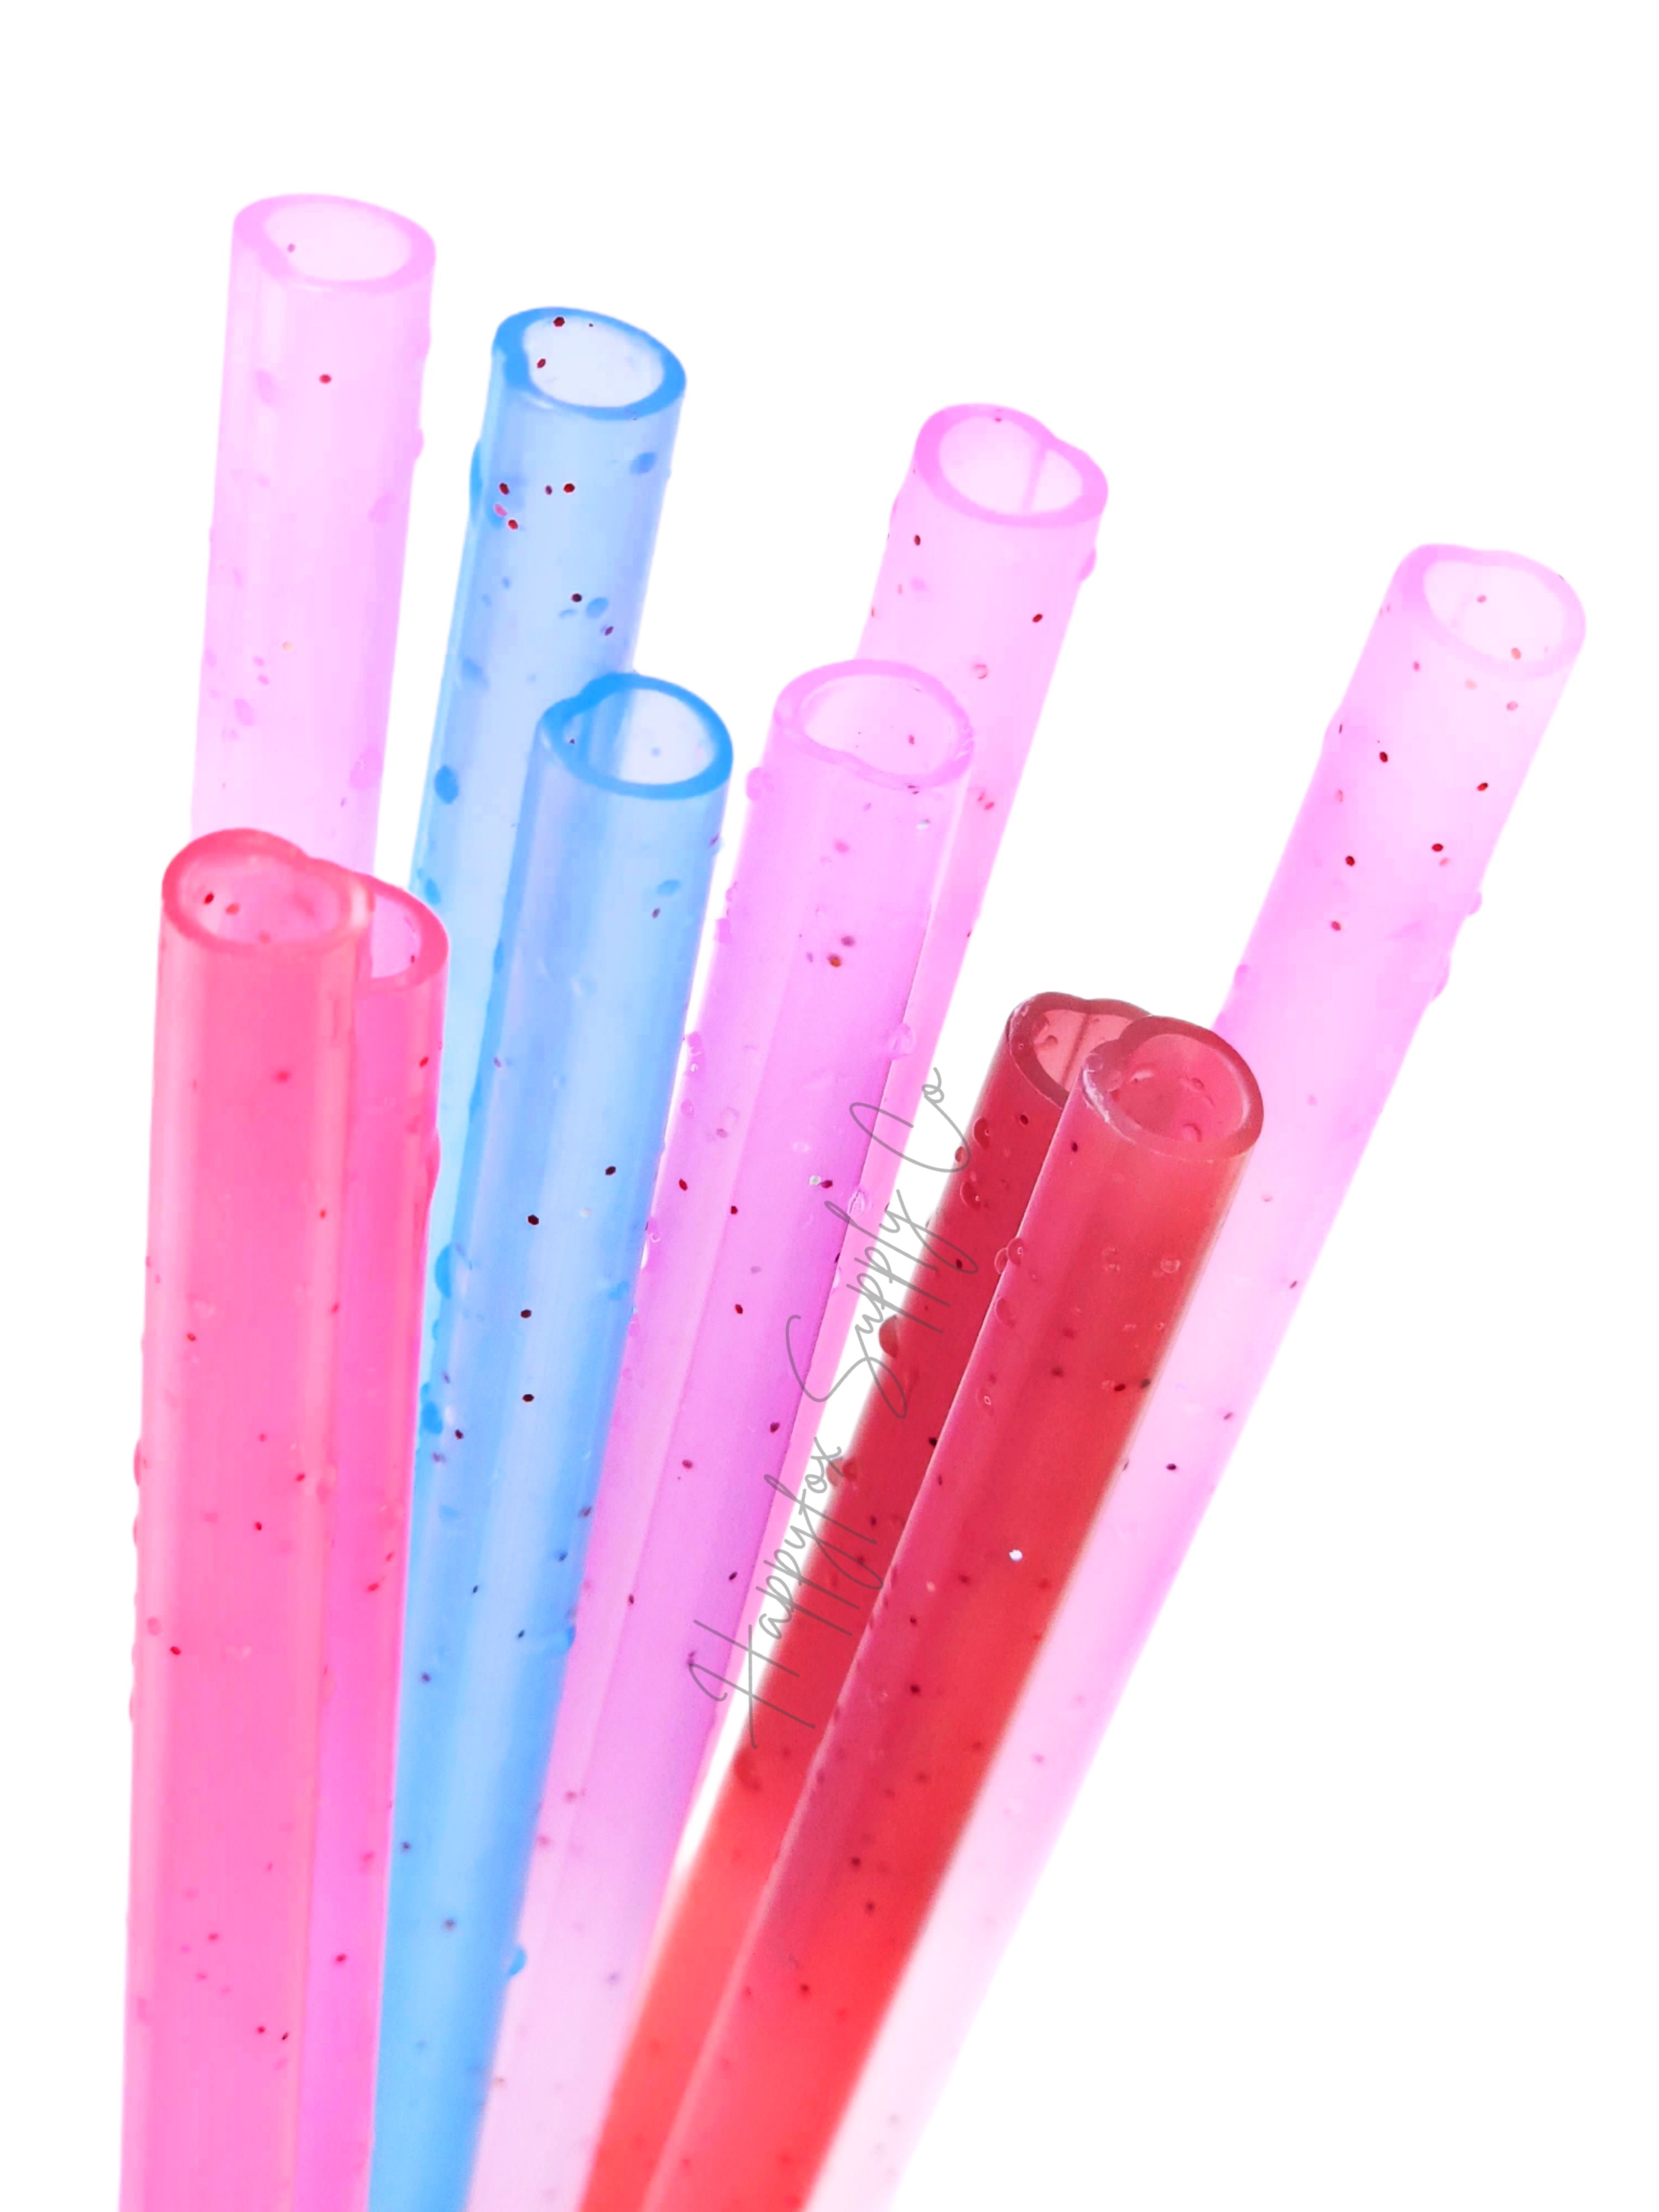 9 Pink Hearts Color Changing Straws No Stopper – Happyfox Supply Co